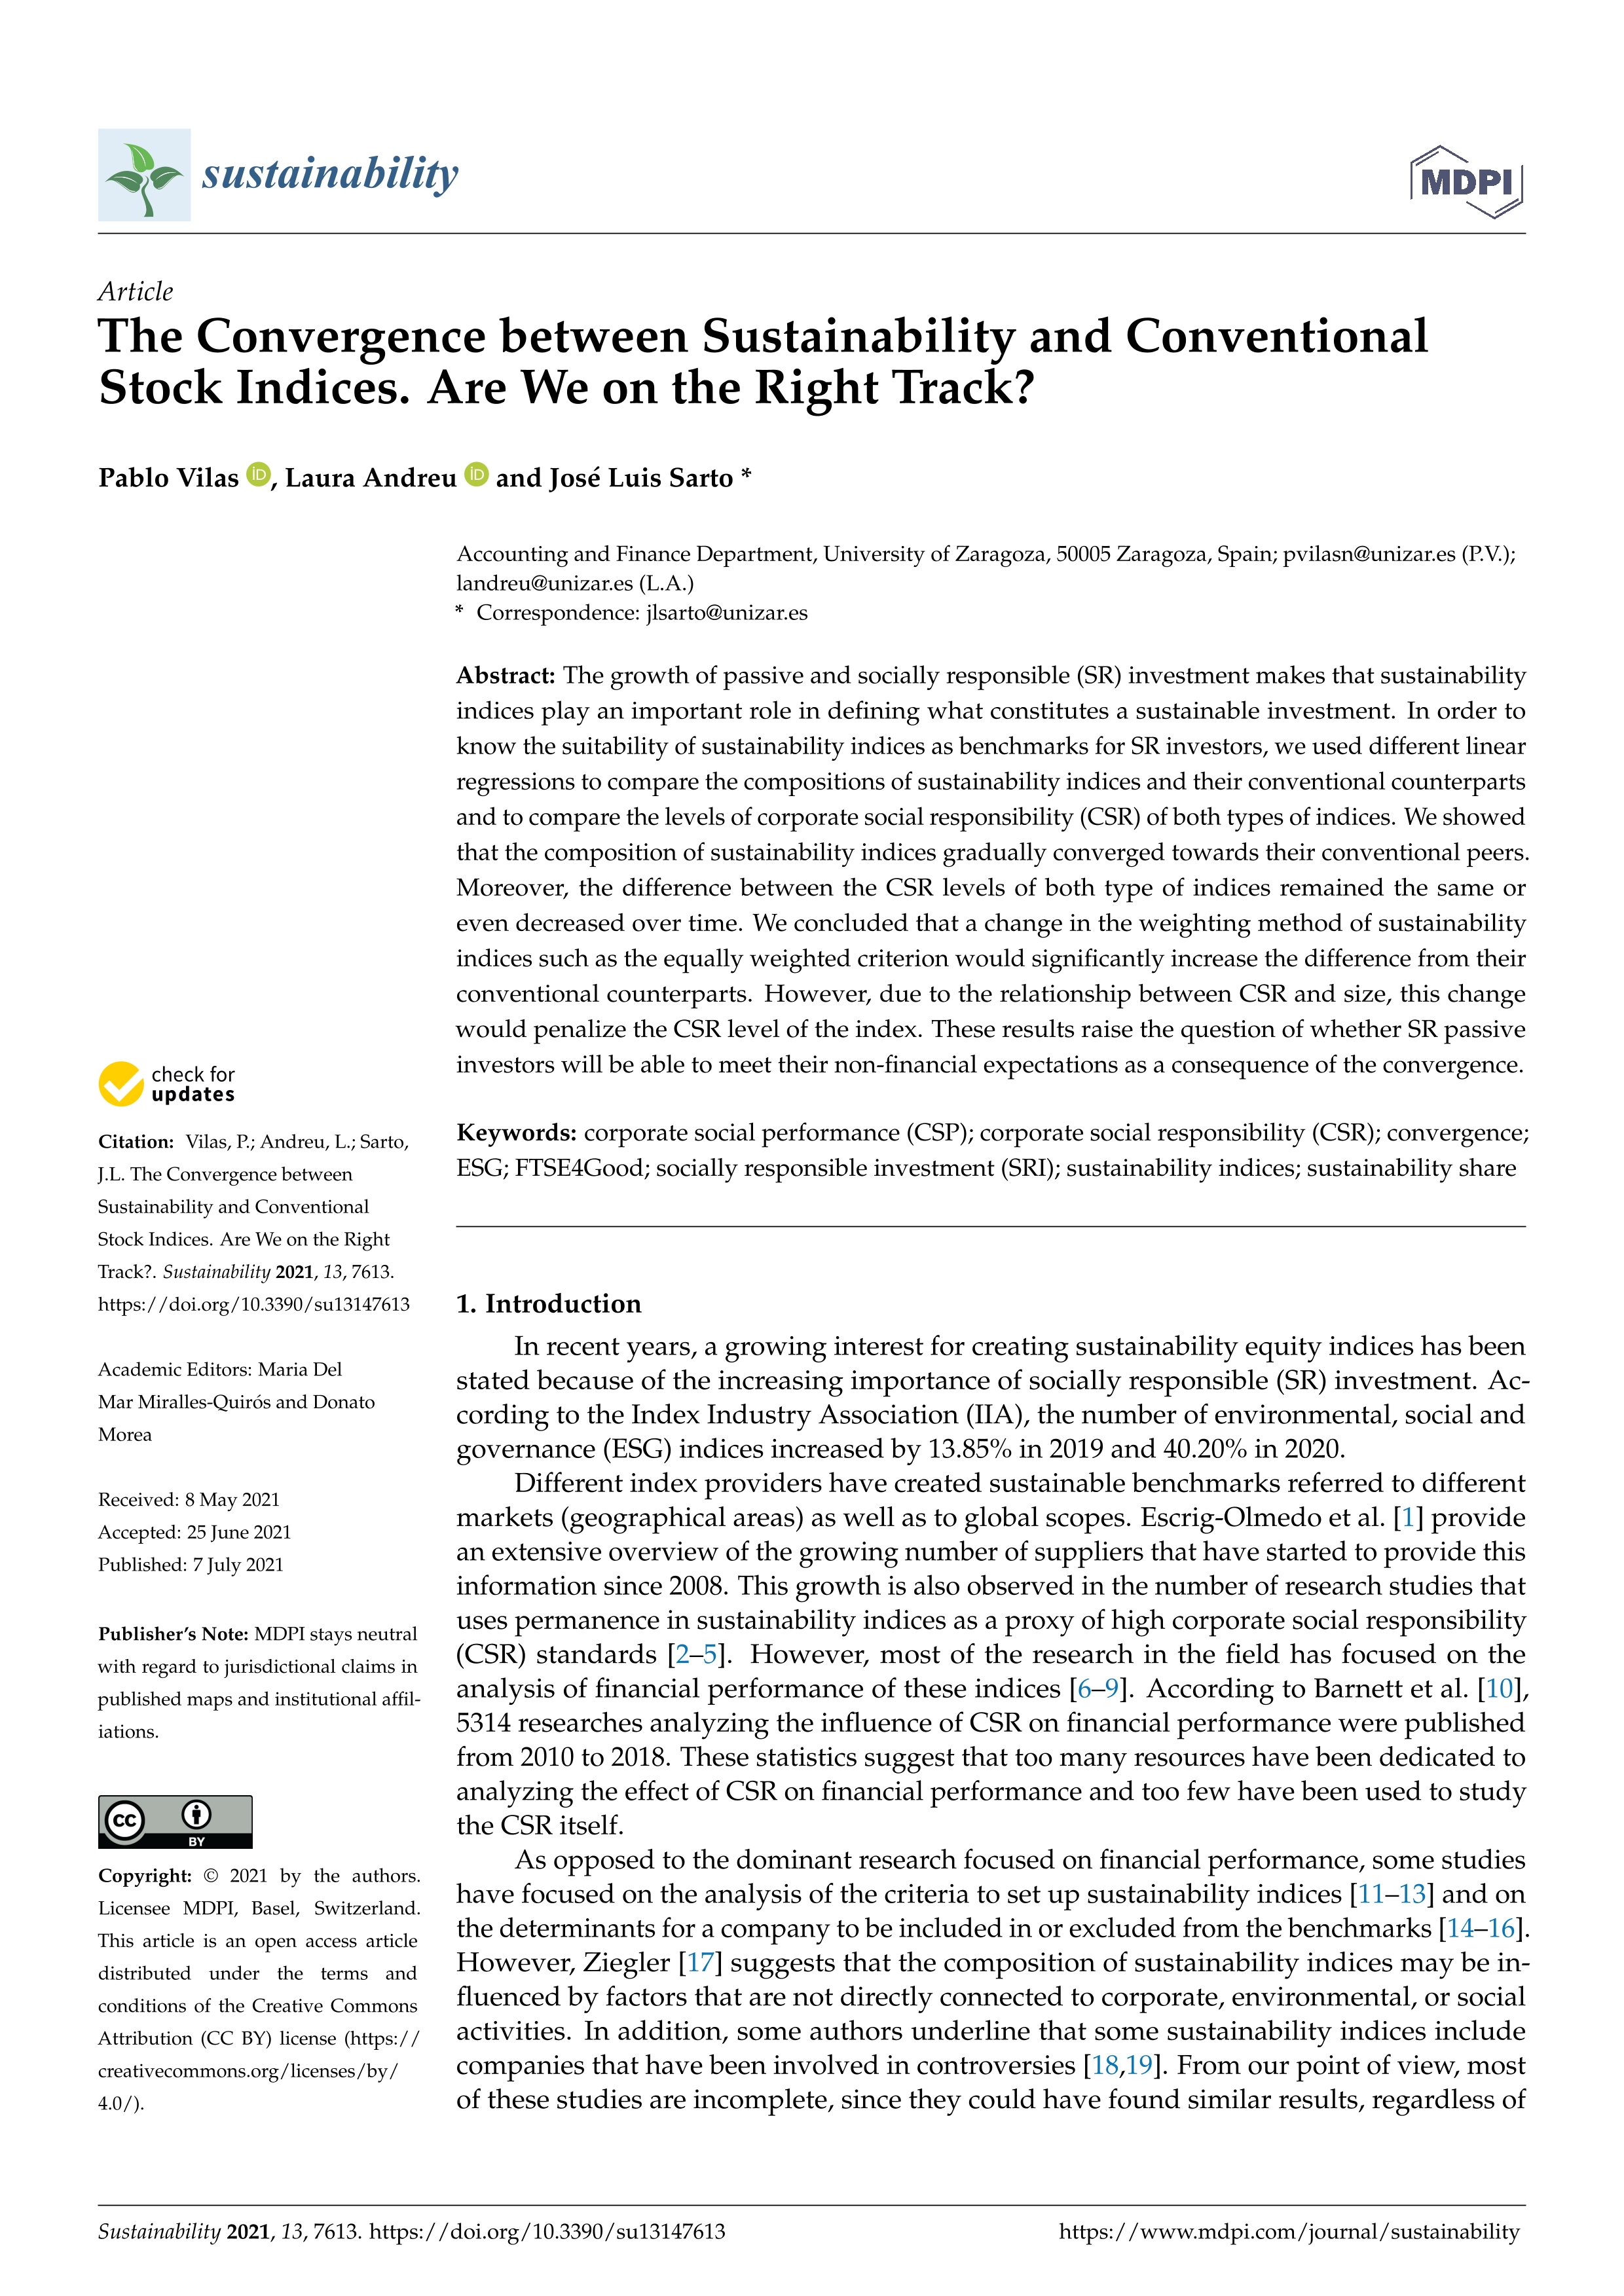 The convergence between sustainability and conventional stock indices. Are we on the right track?